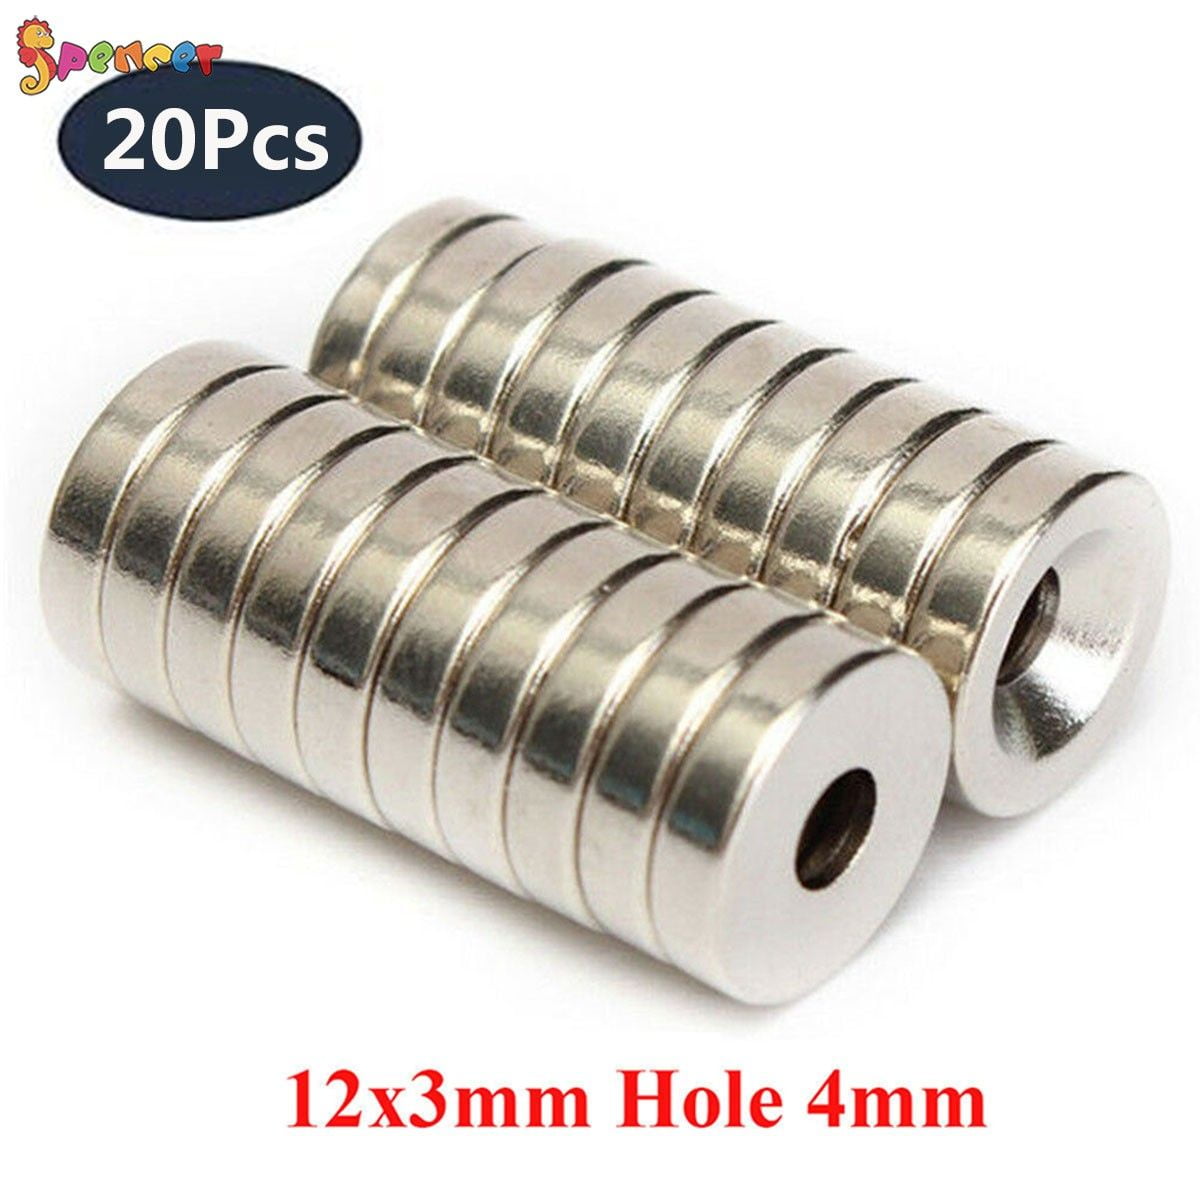 10pcs N42 12mm X 4mm Super Strong Round Magnets Disc Rare Earth Neodymium Magnet 